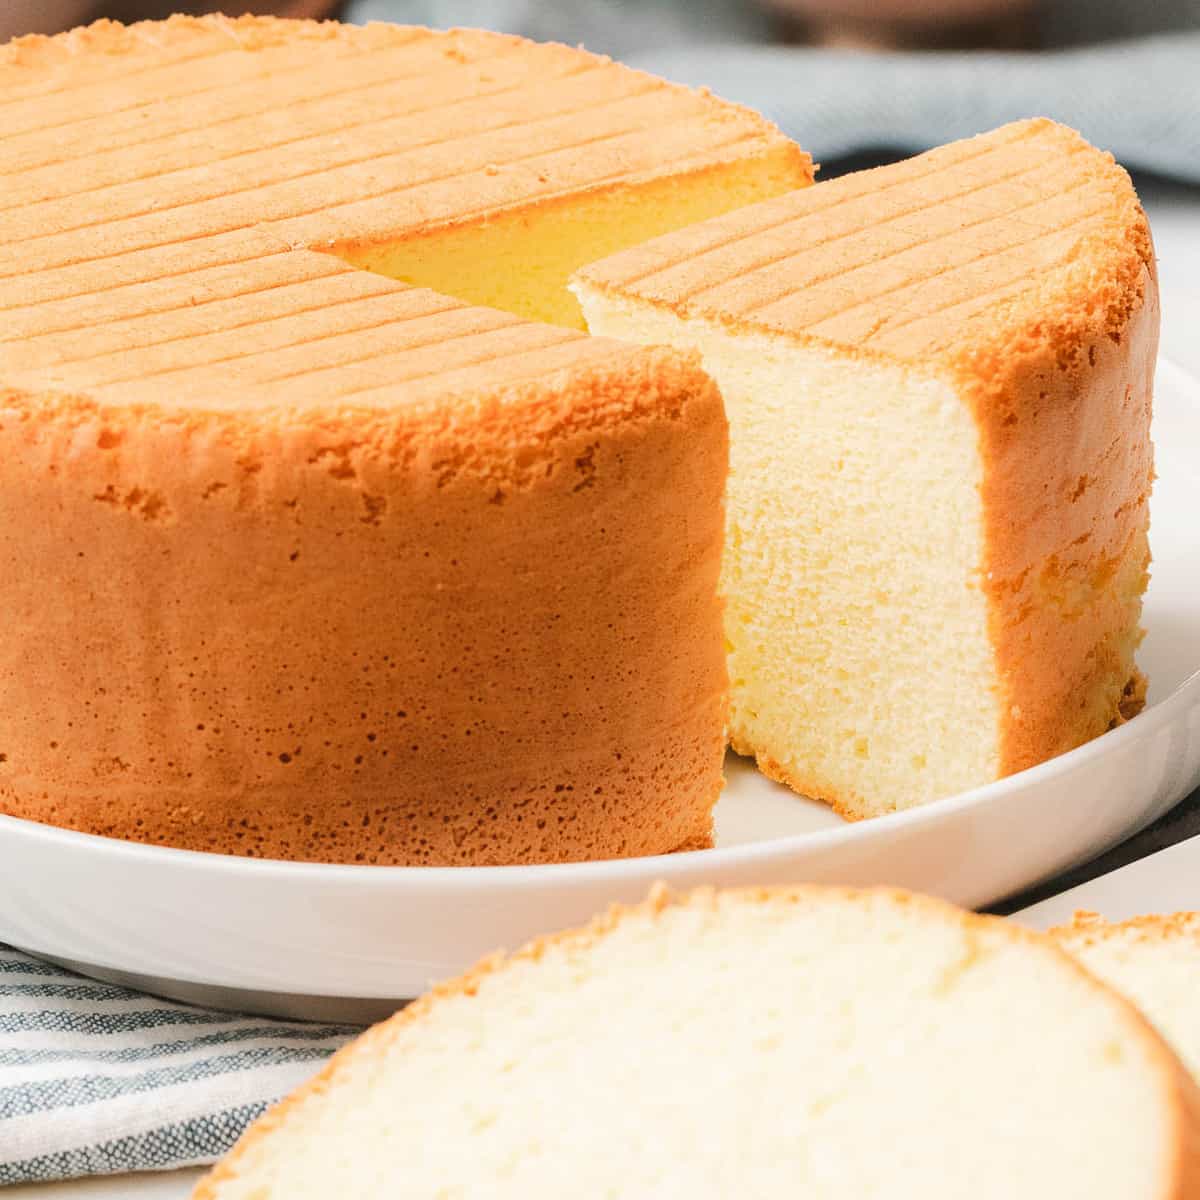 Easy sponge cake with slice taken out to reveal soft, fluffy, texture.